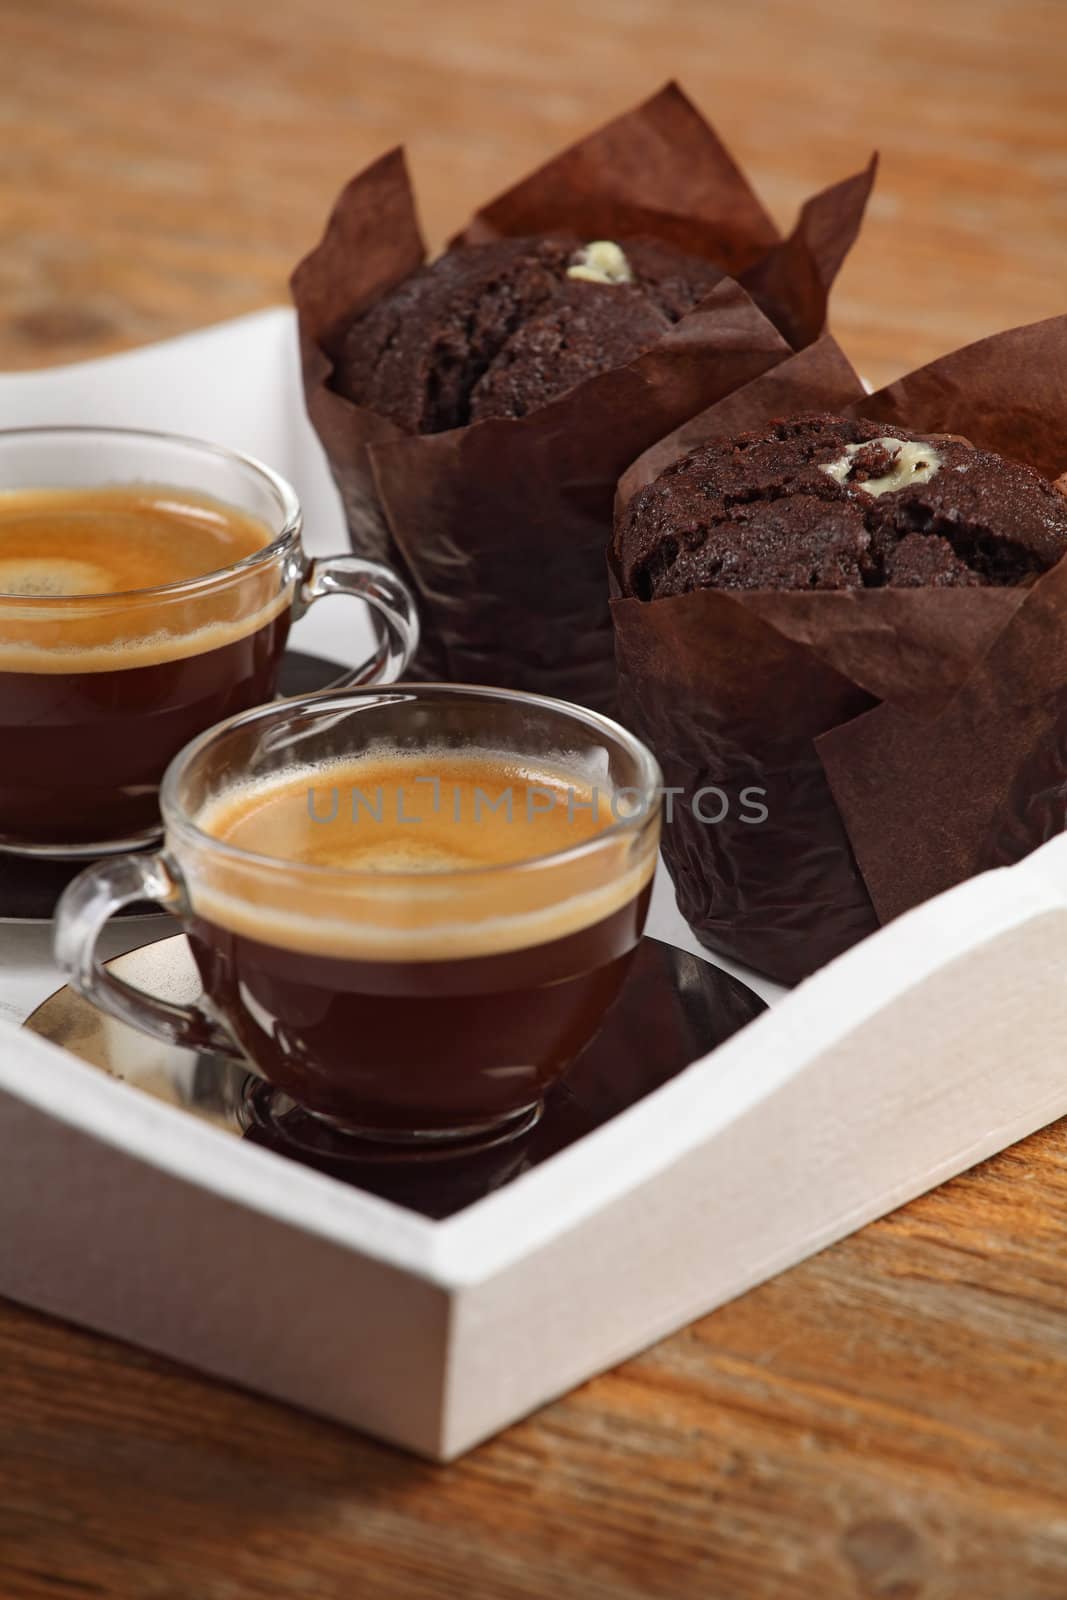 Chocolate muffins and espresso by sumners